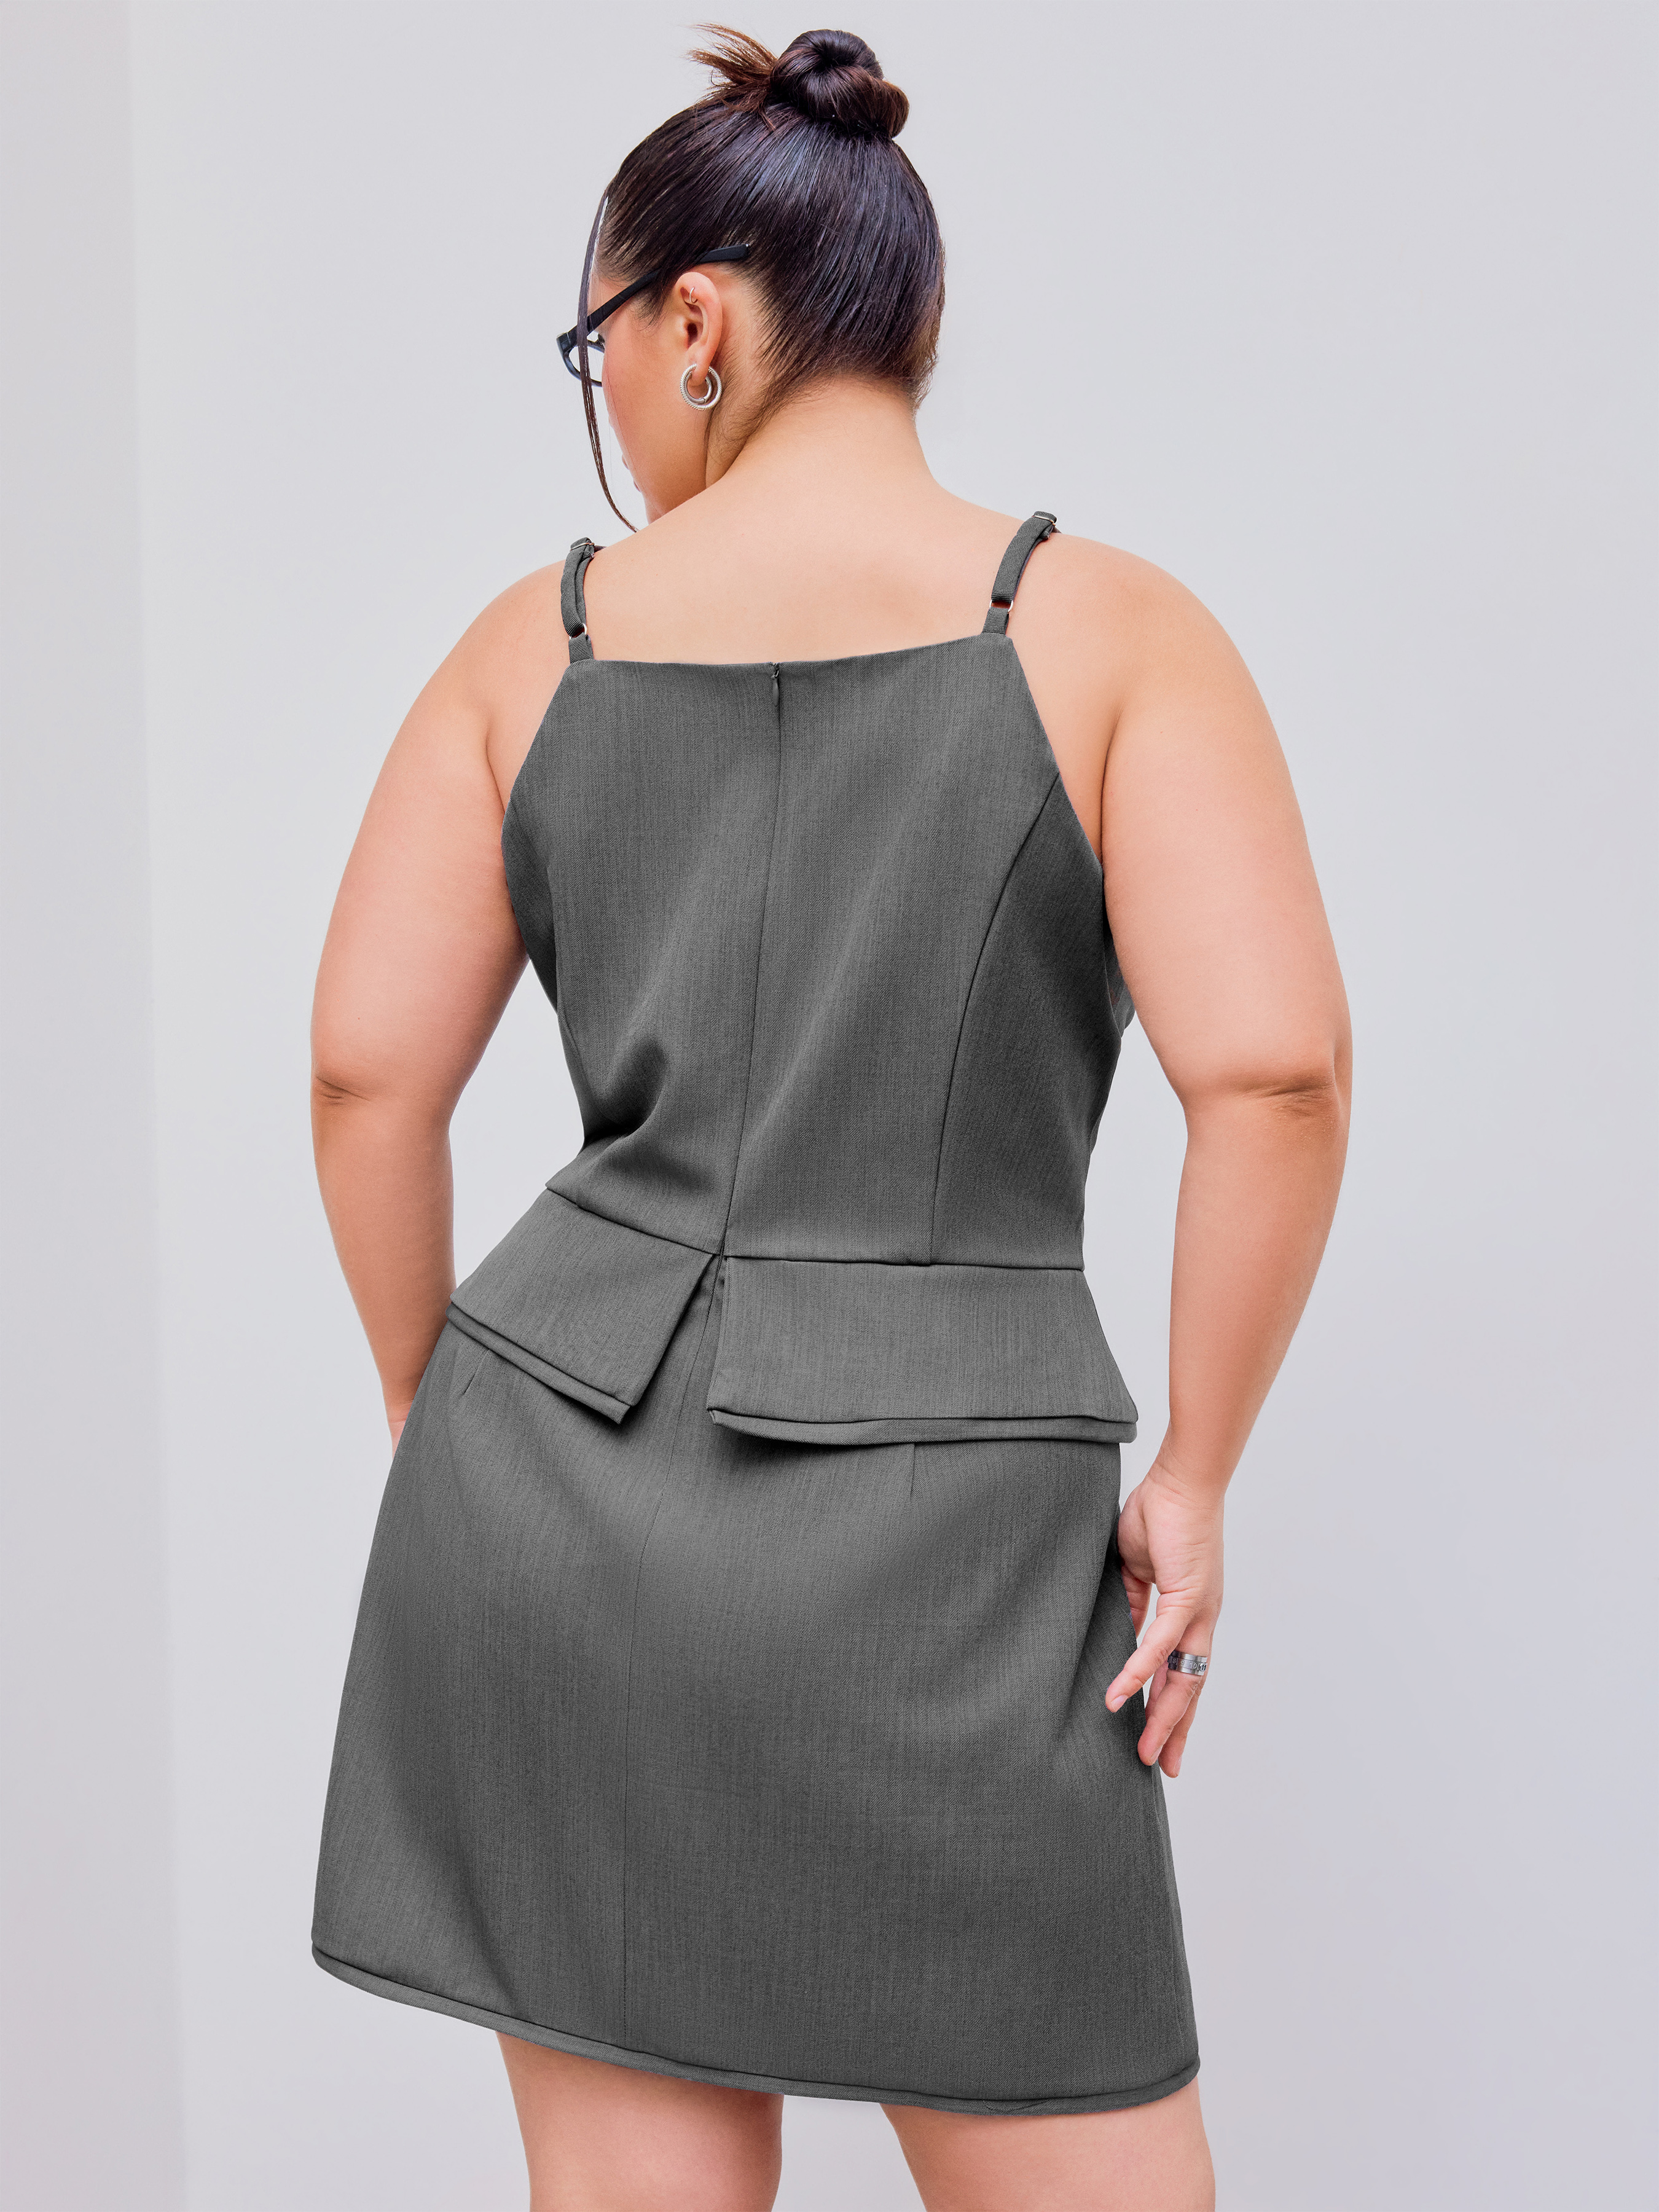 Buy plus size one piece in India @ Limeroad